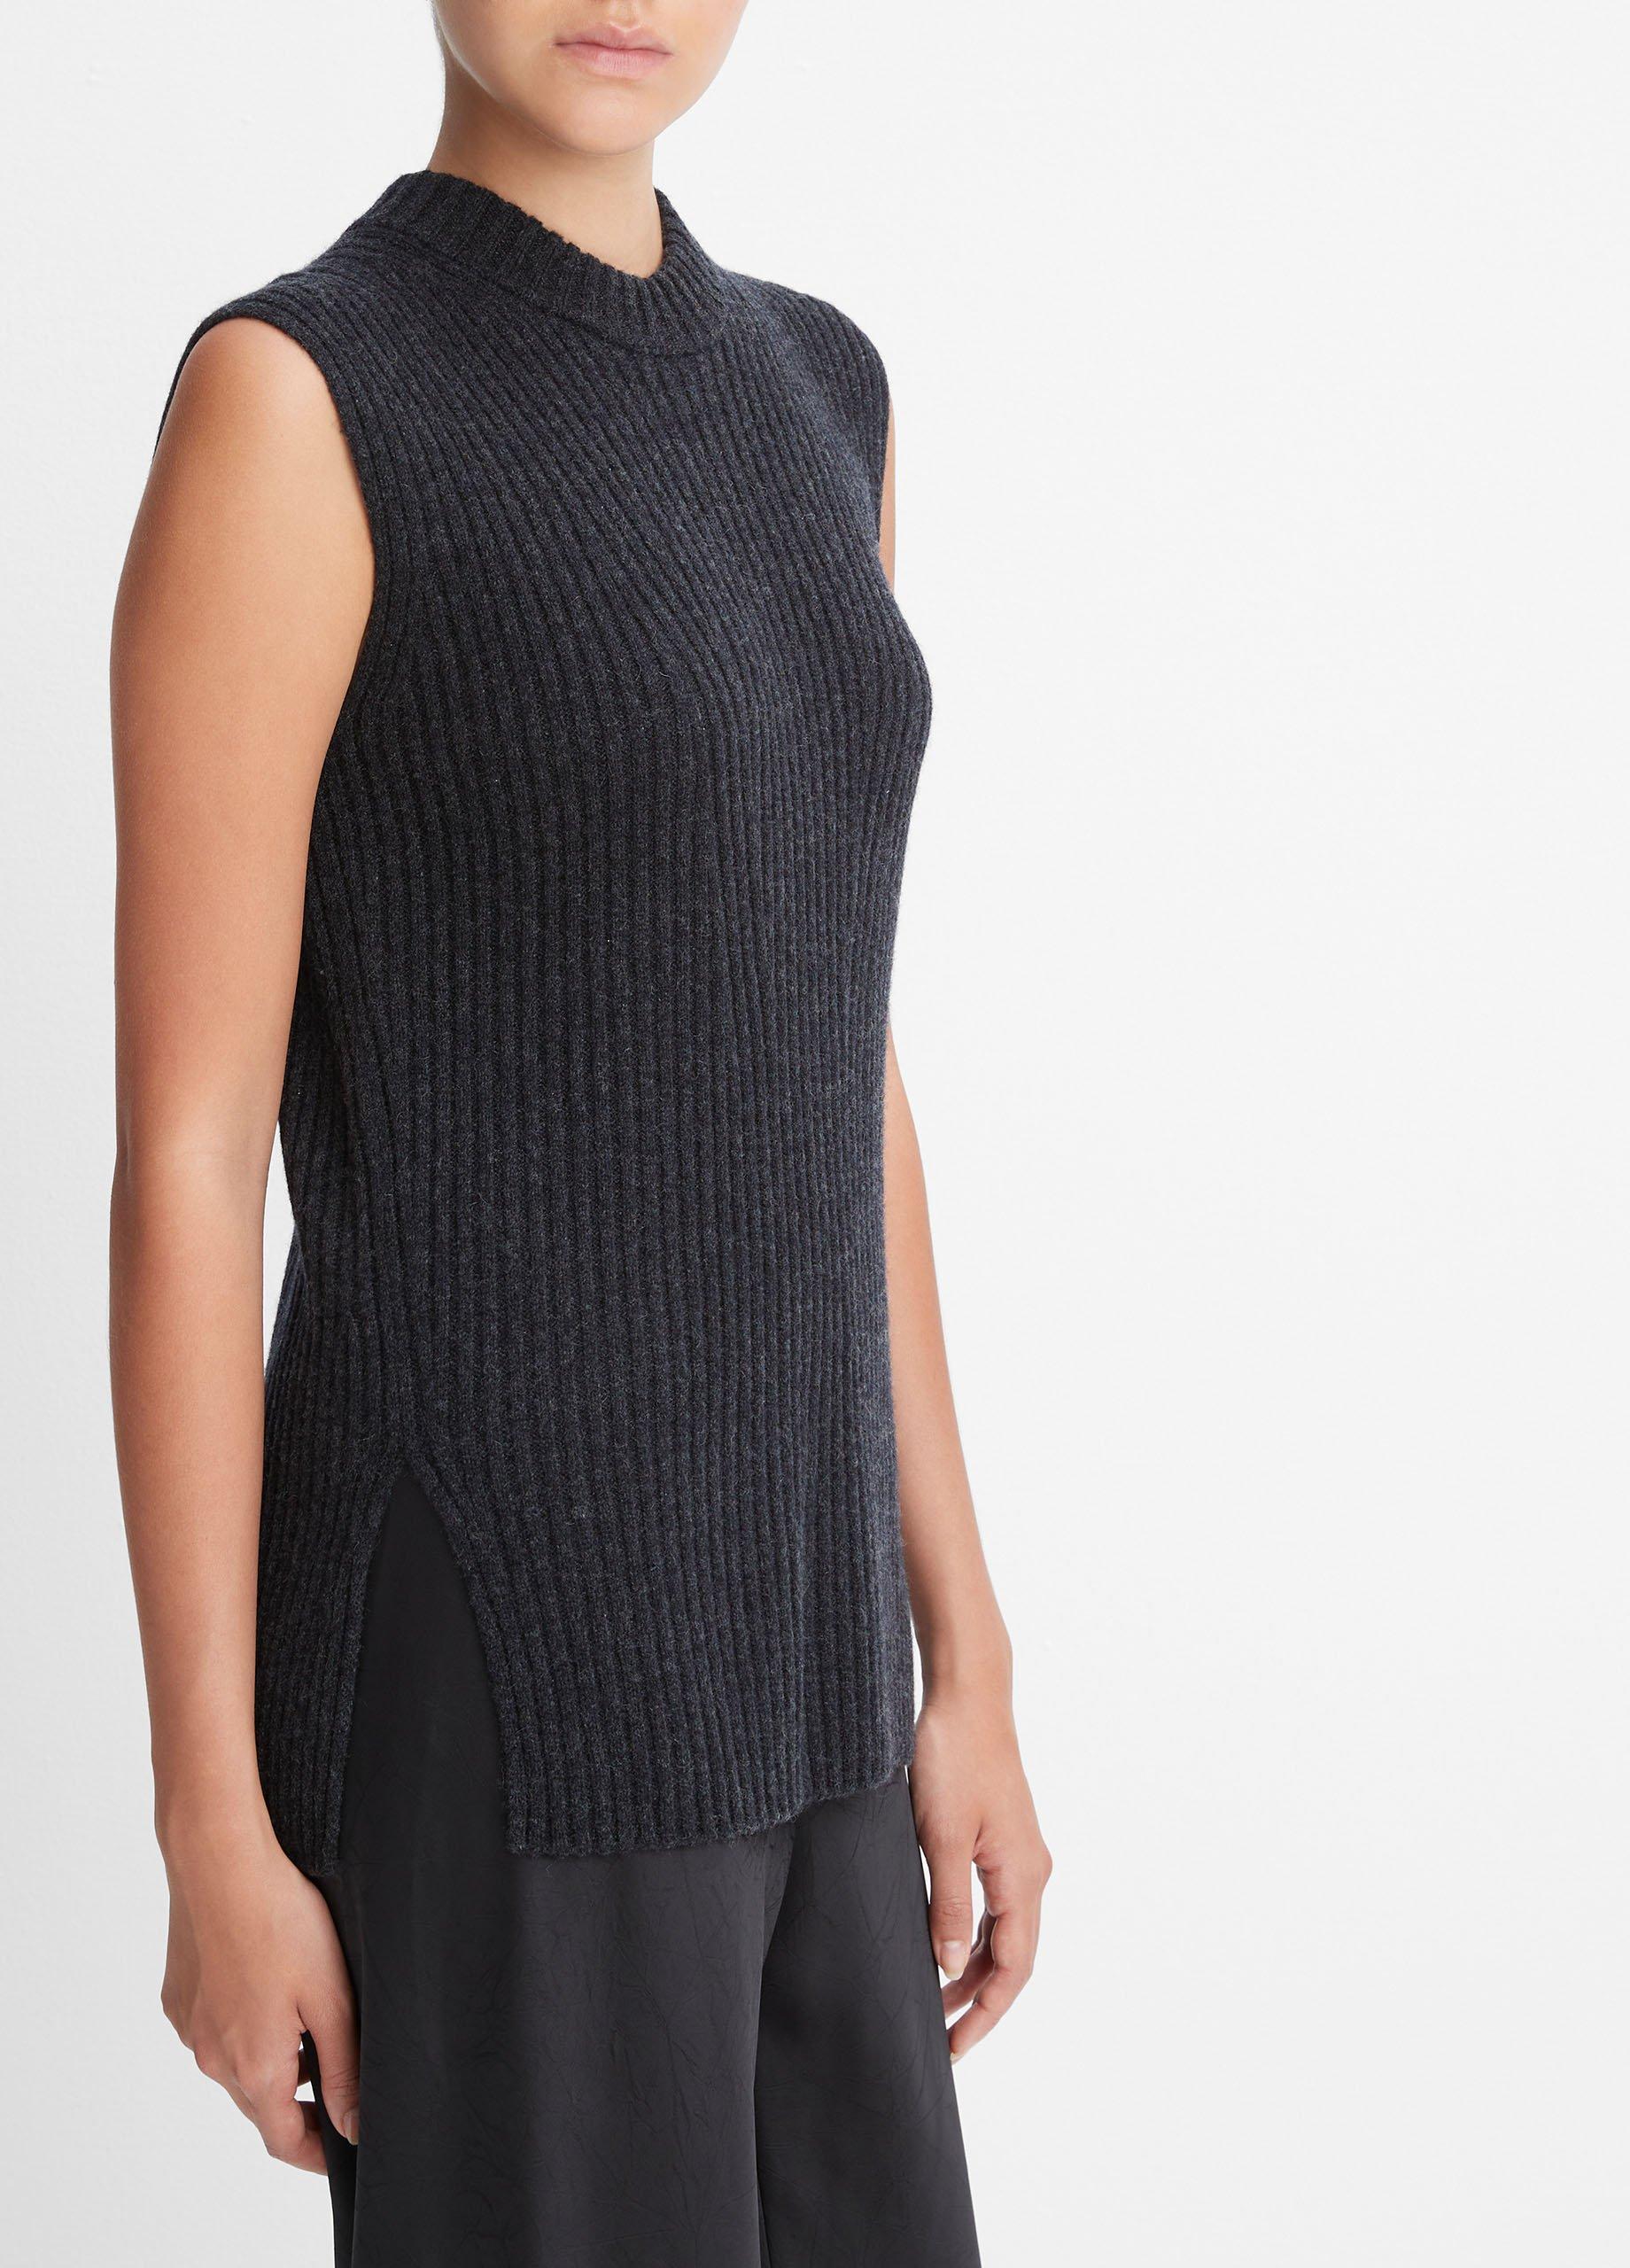 Ribbed Wool and Cashmere Sleeveless Tunic Sweater in Sweaters